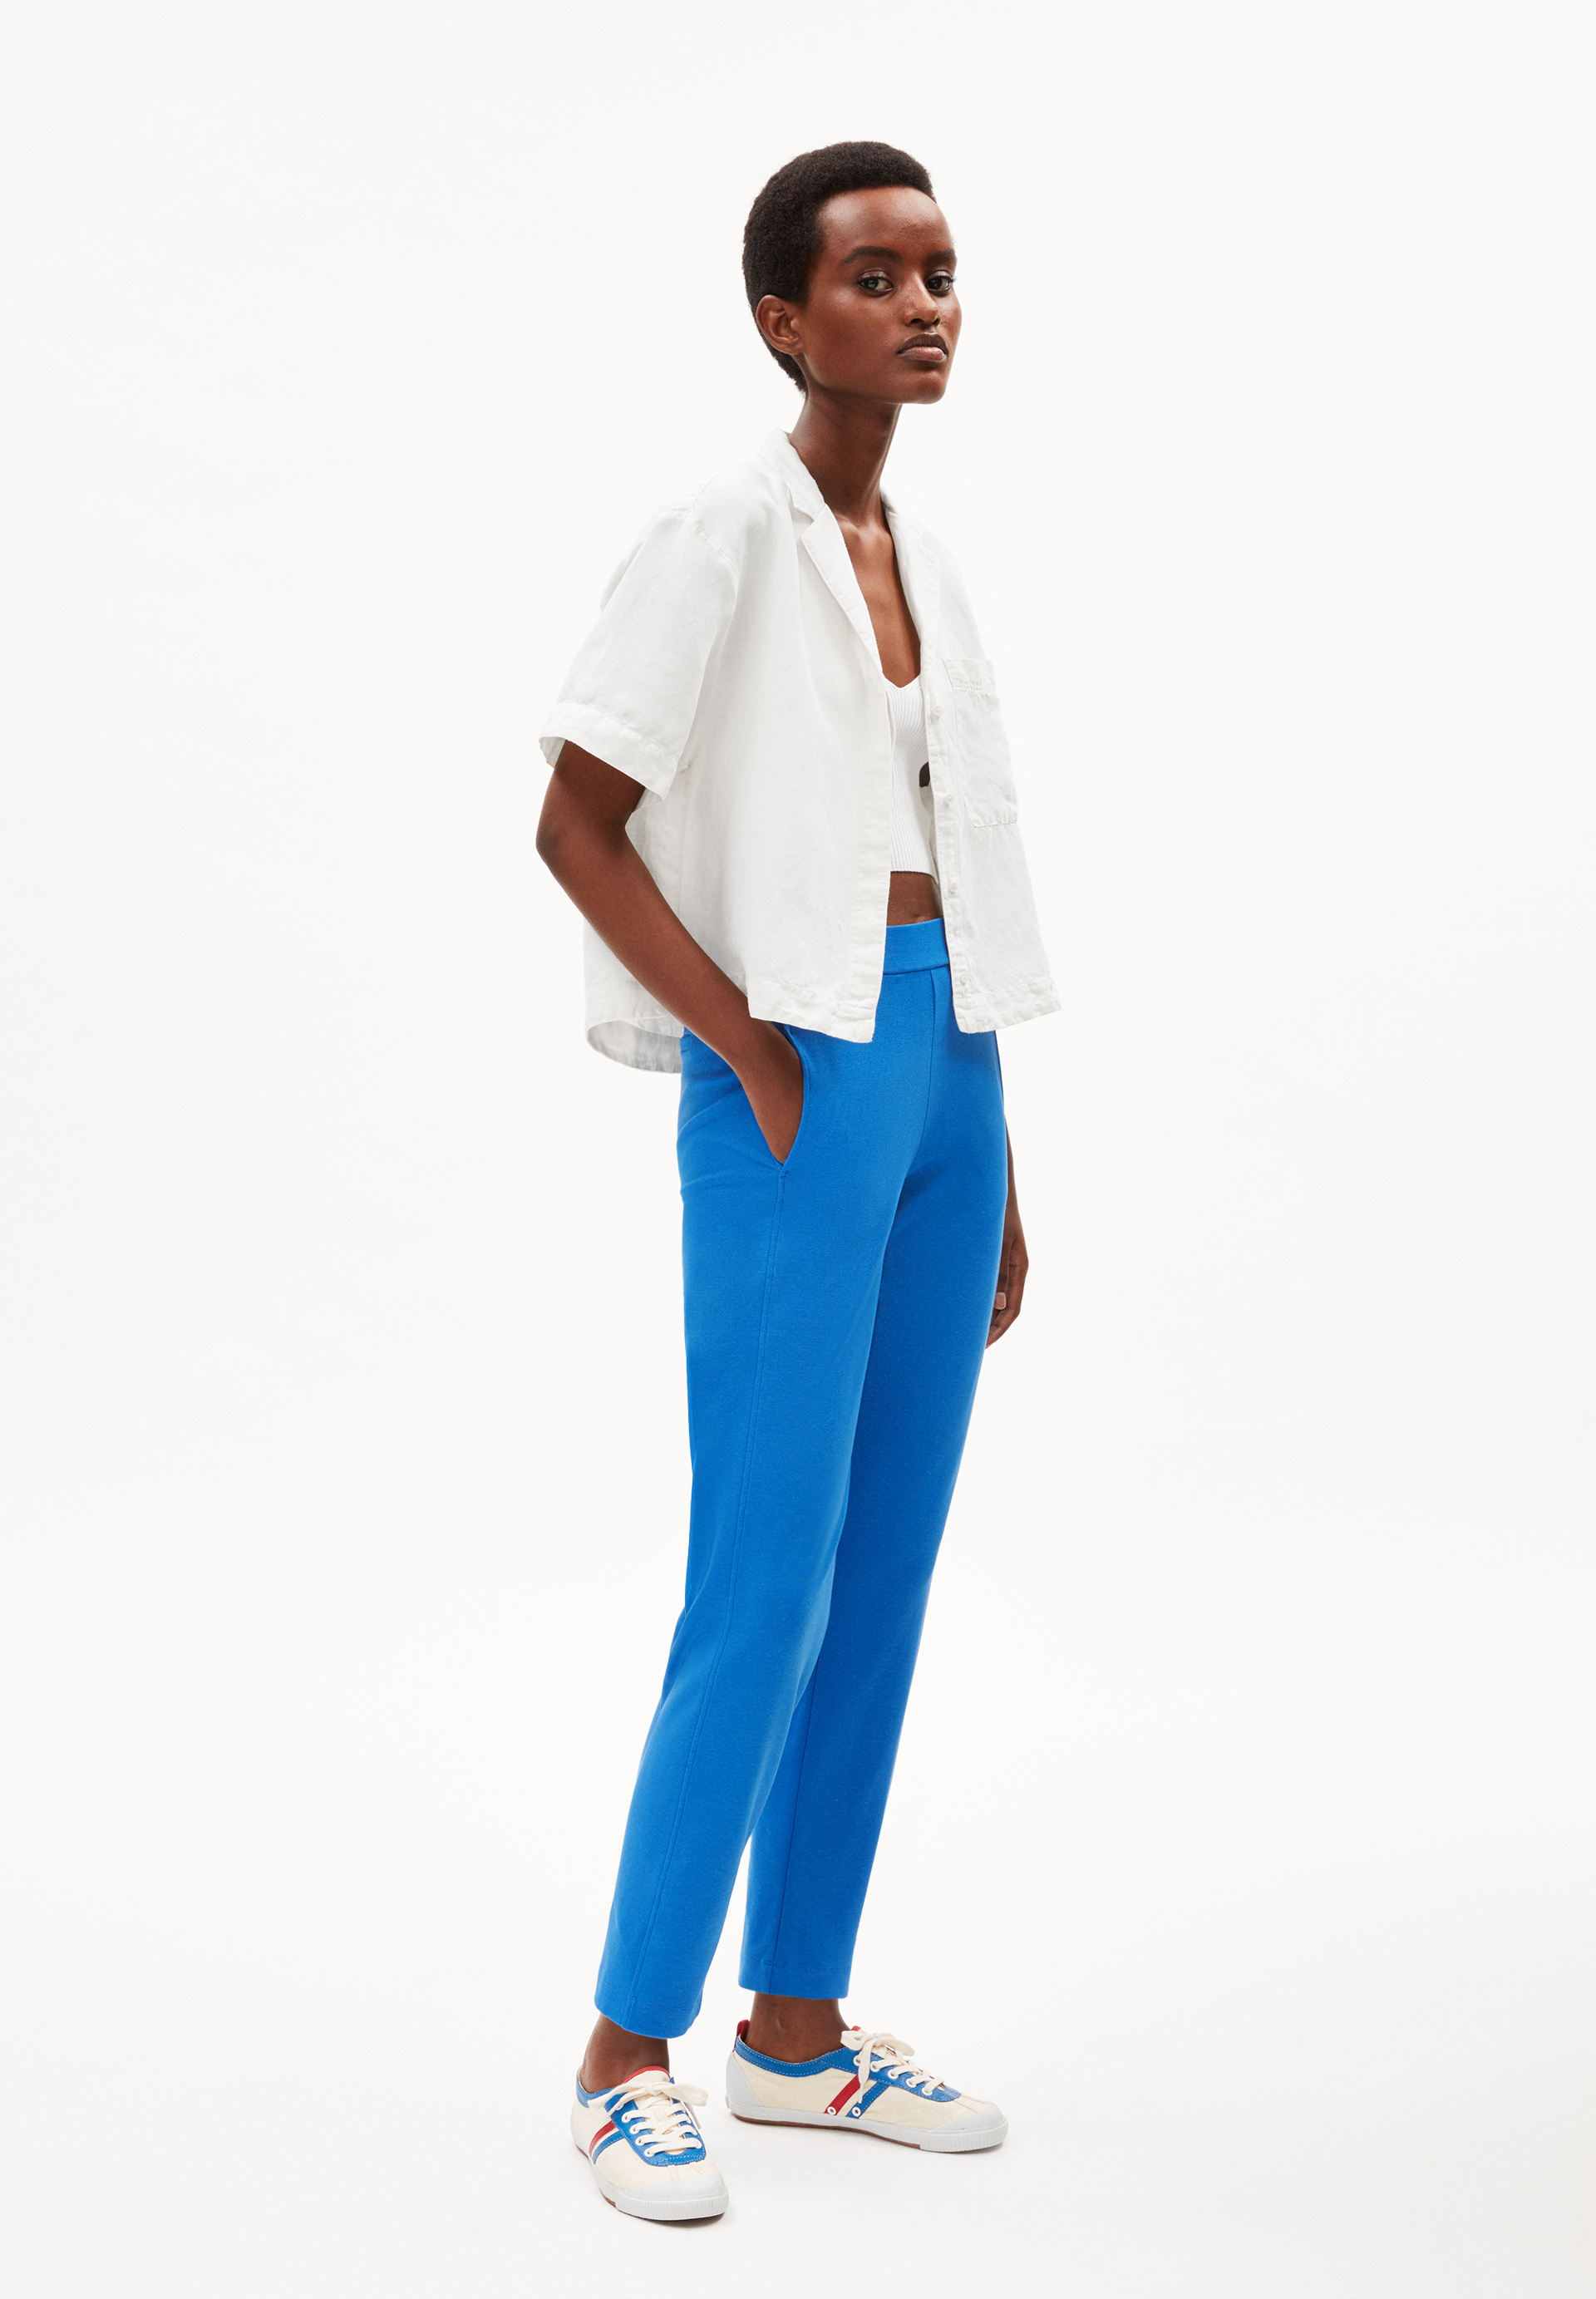 MAGDAALENA Jersey Pants Regular Fit with of LENZING™ ECOVERO™ Viscose